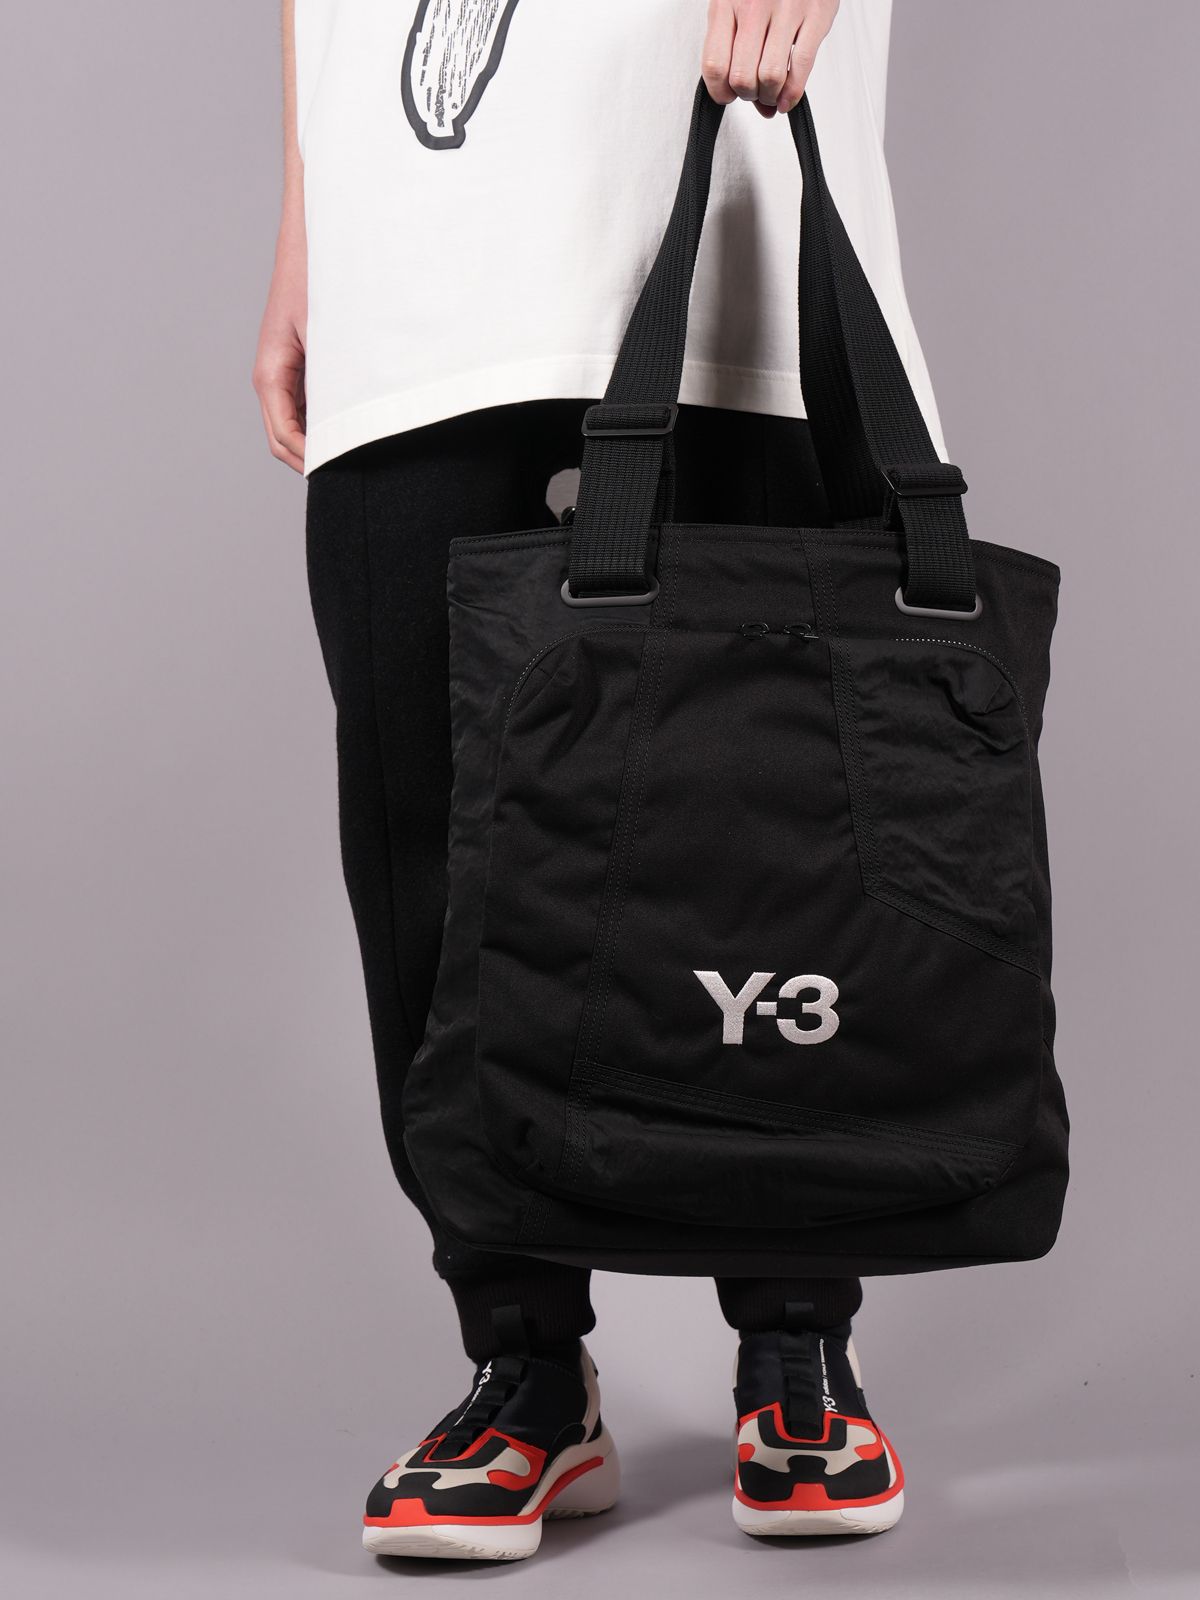 Y-3 - 【ラスト1点】 Y-3 CLASSIC TOTE / ワイスリー クラシックトート 